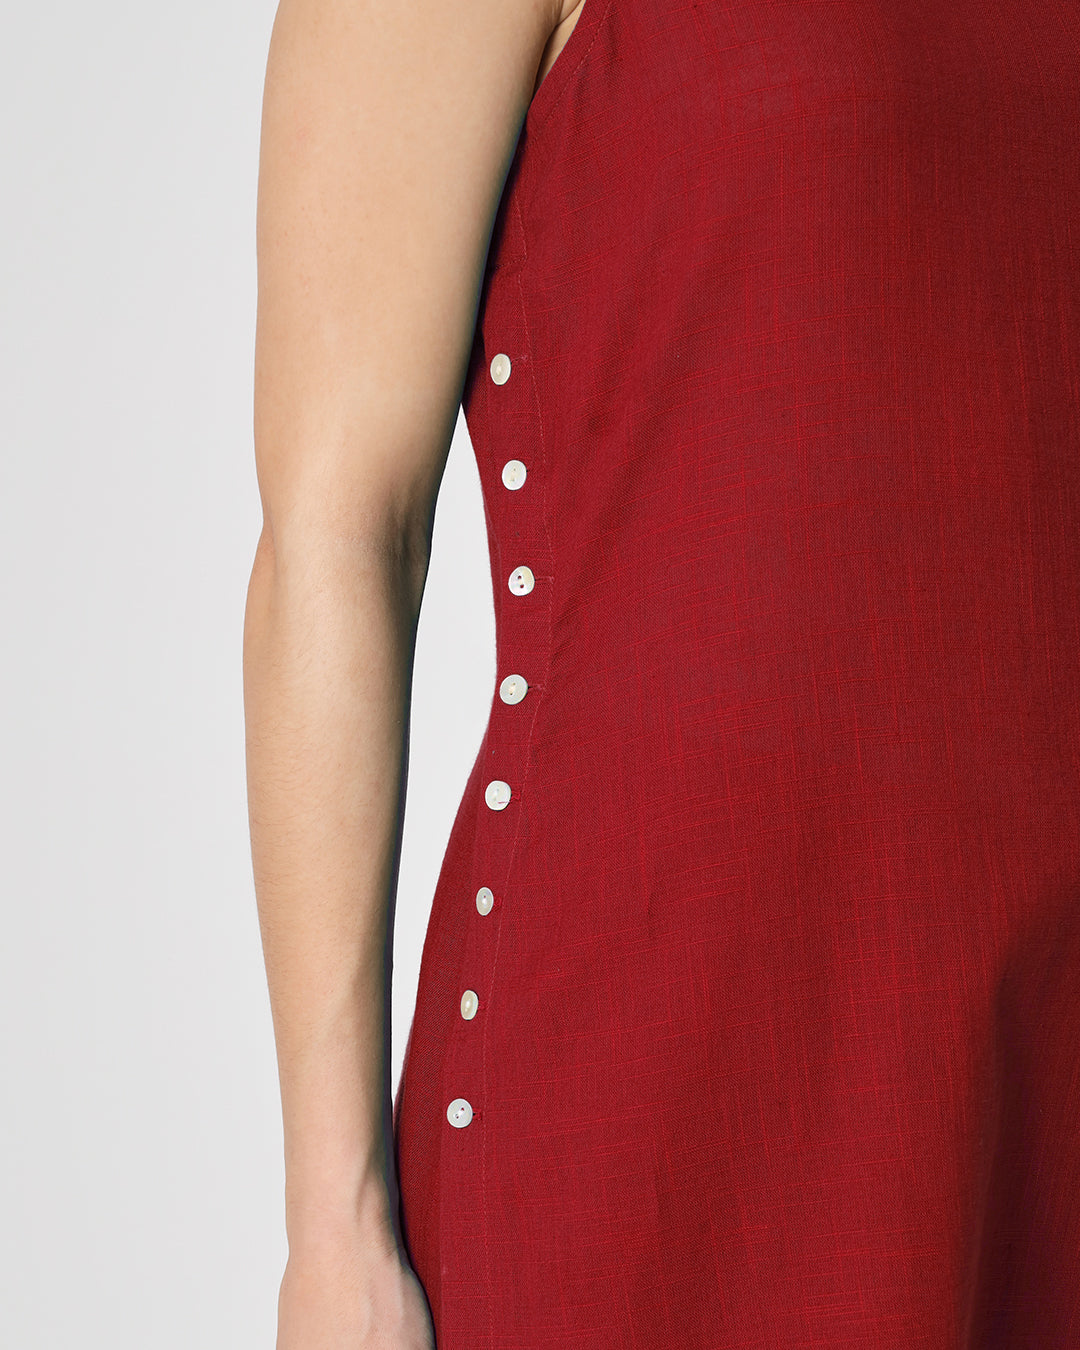 Classic Red Sleeveless Long Solid Kurta (Without Bottoms)